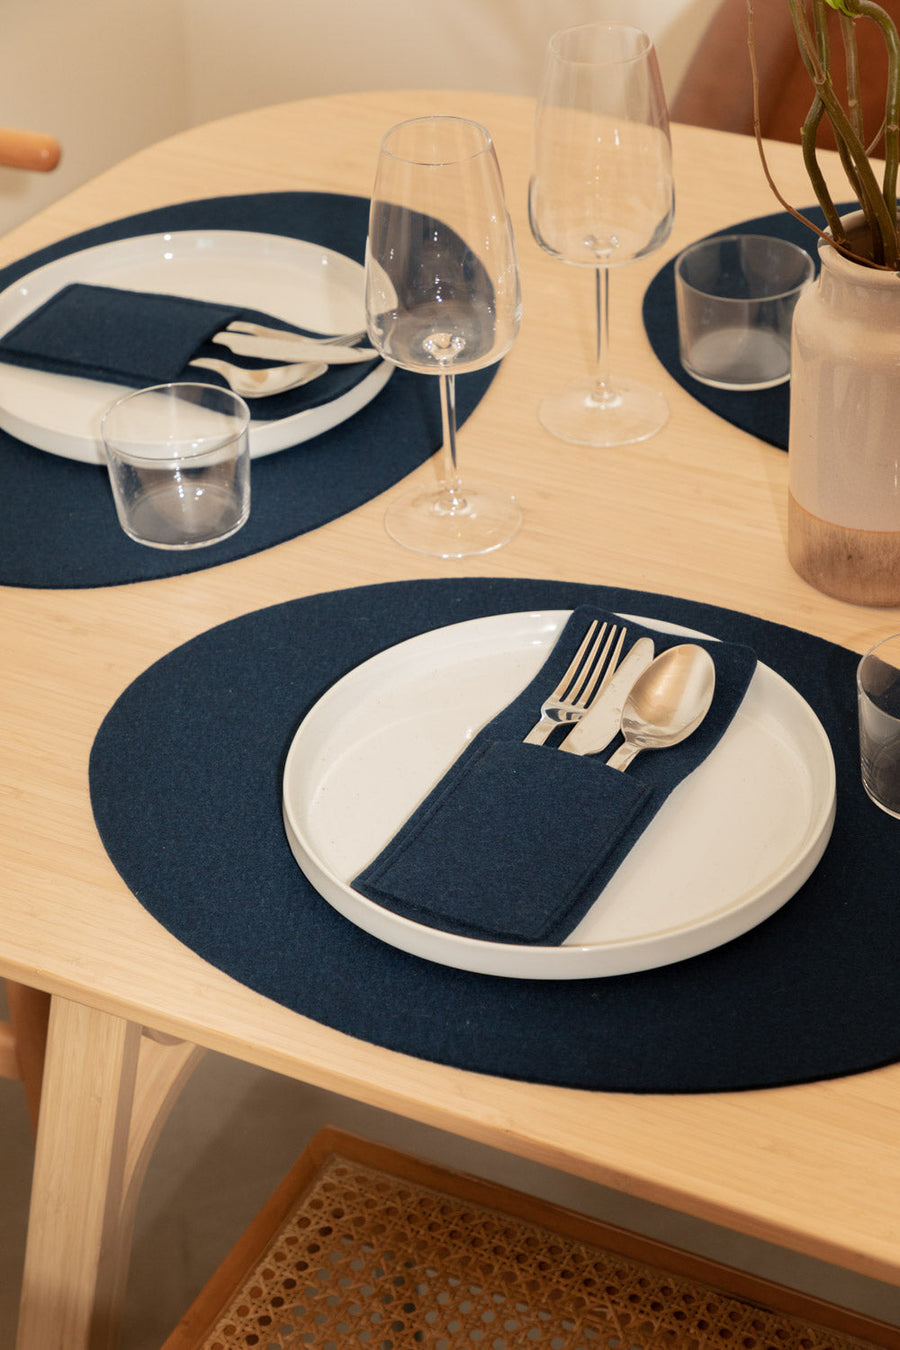 Oval Placemat Felt - 4 Pack (6643612942445)